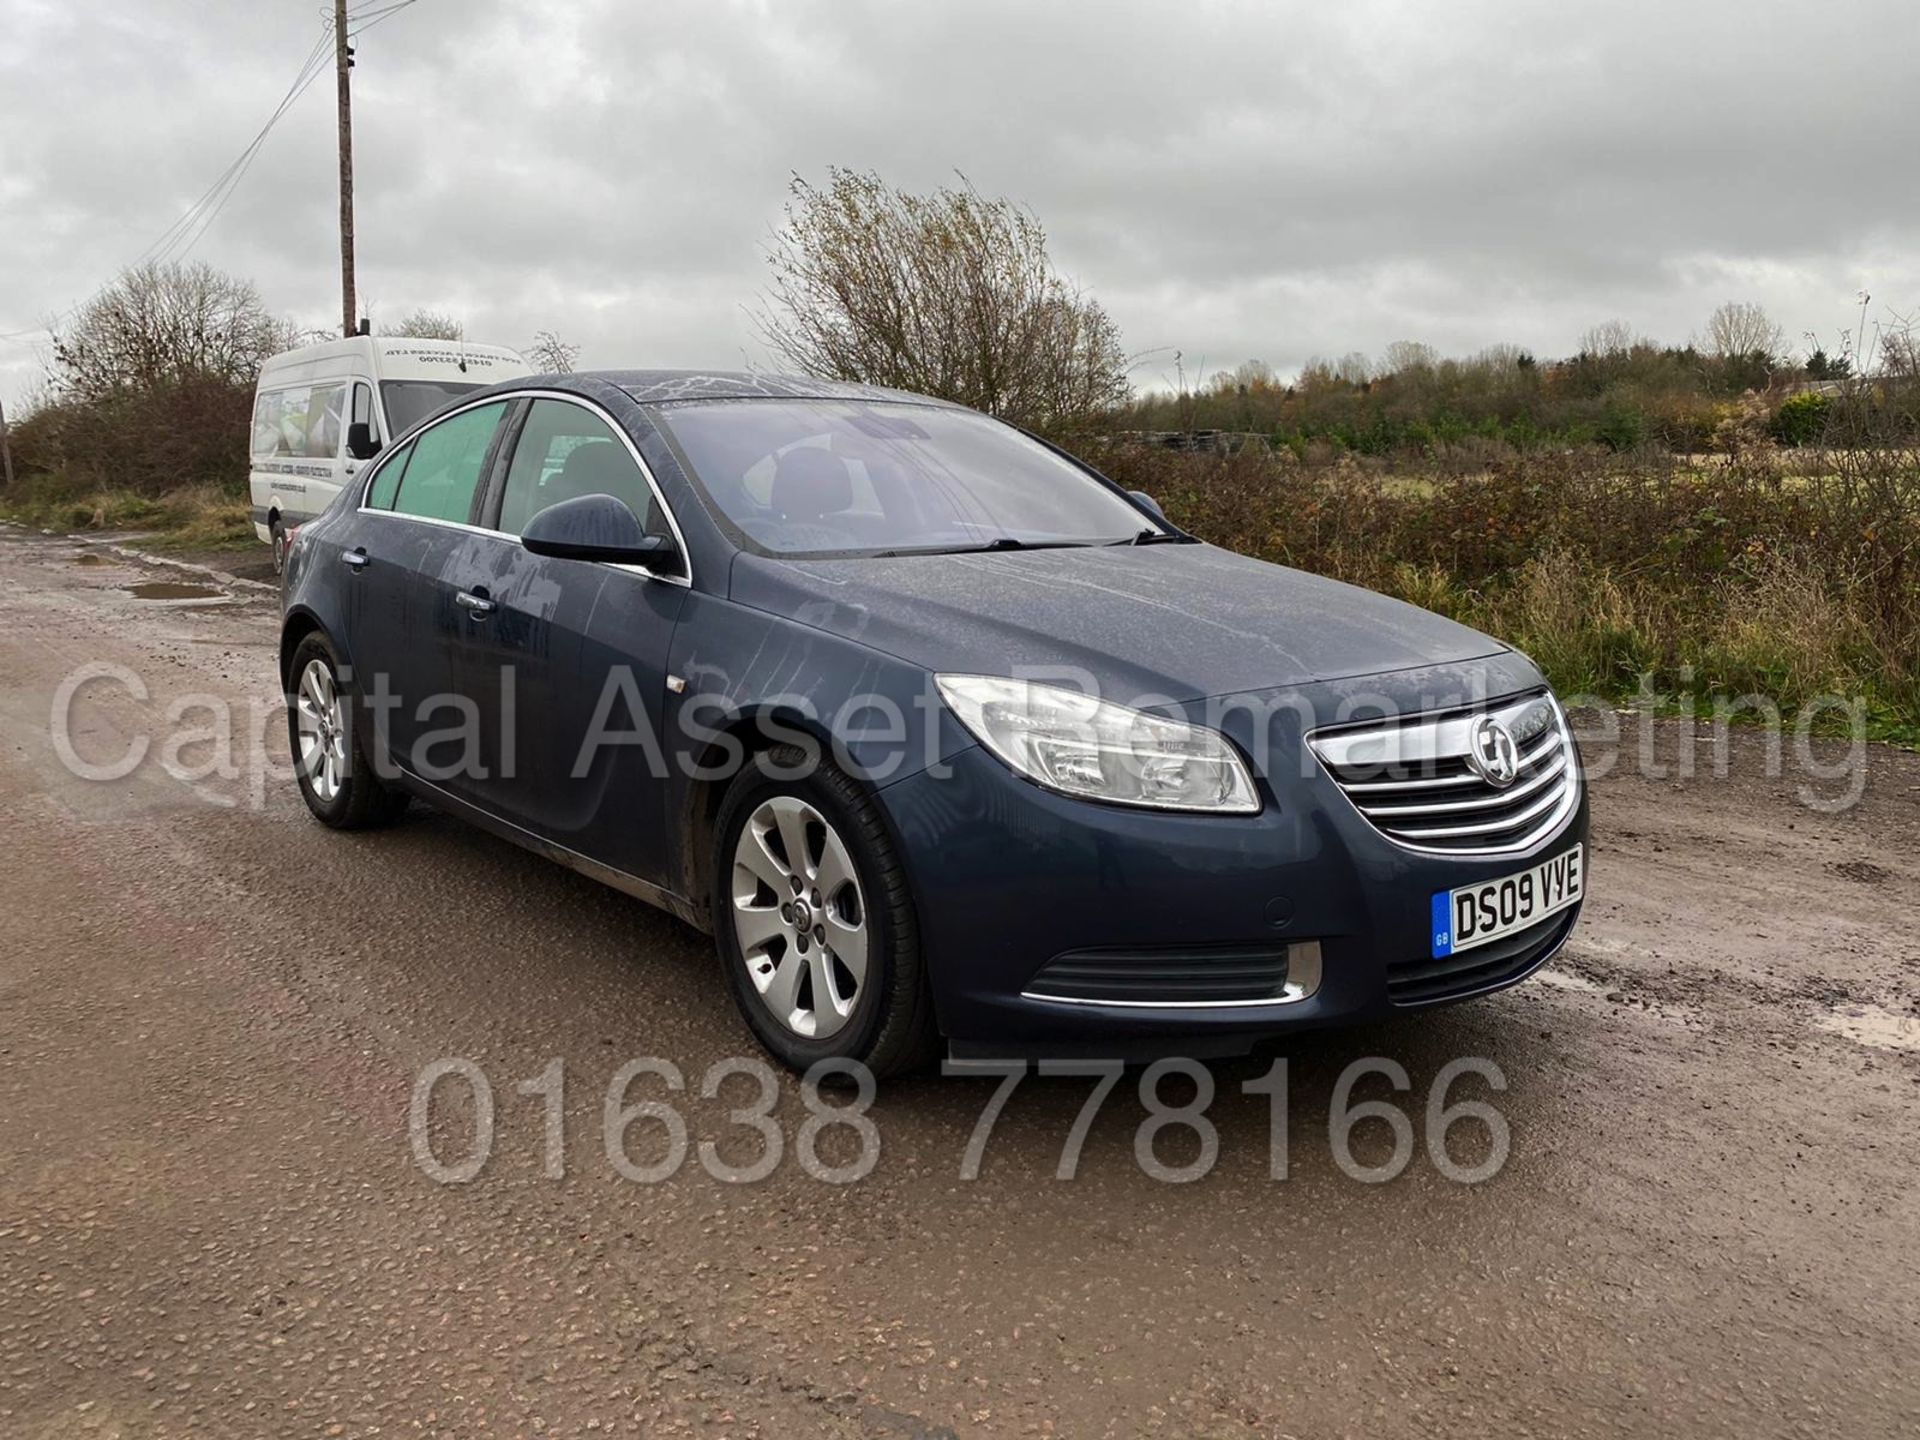 ON SALE VAUXHALL INSIGNIA *SE EDITION* (2009) '1.8 PETROL -6 SPEED' *A/C* LOW MILES ! (NO VAT)